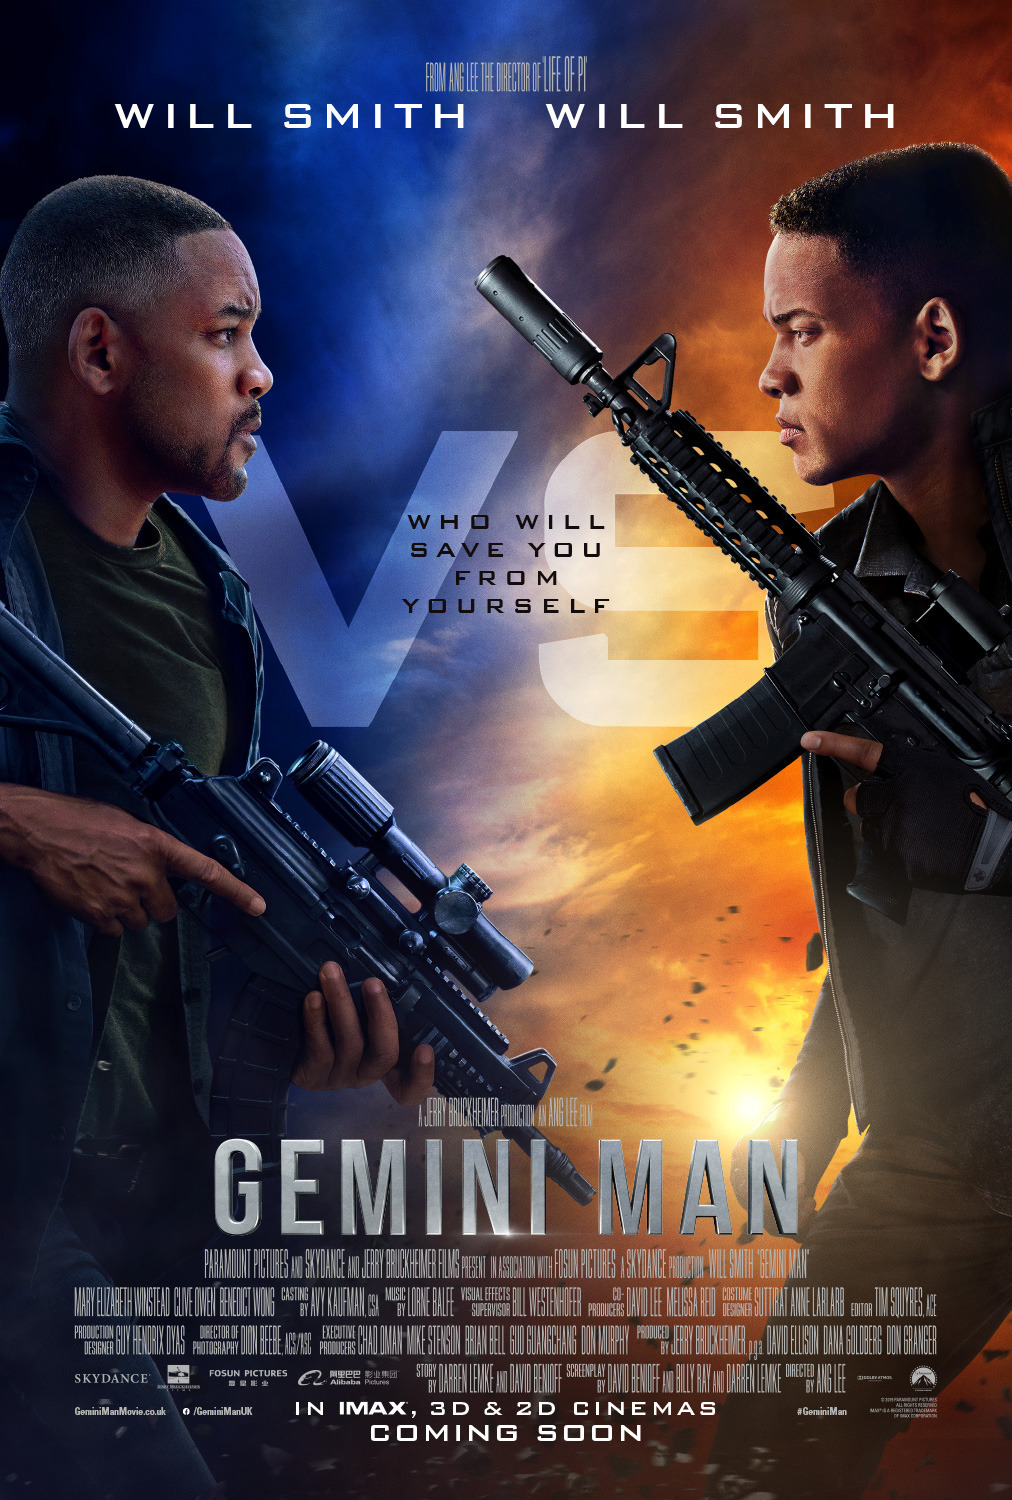 Gemini Man, Will Smith, Clive Owen, director Ang Lee, producer Jerry Bruckheimer